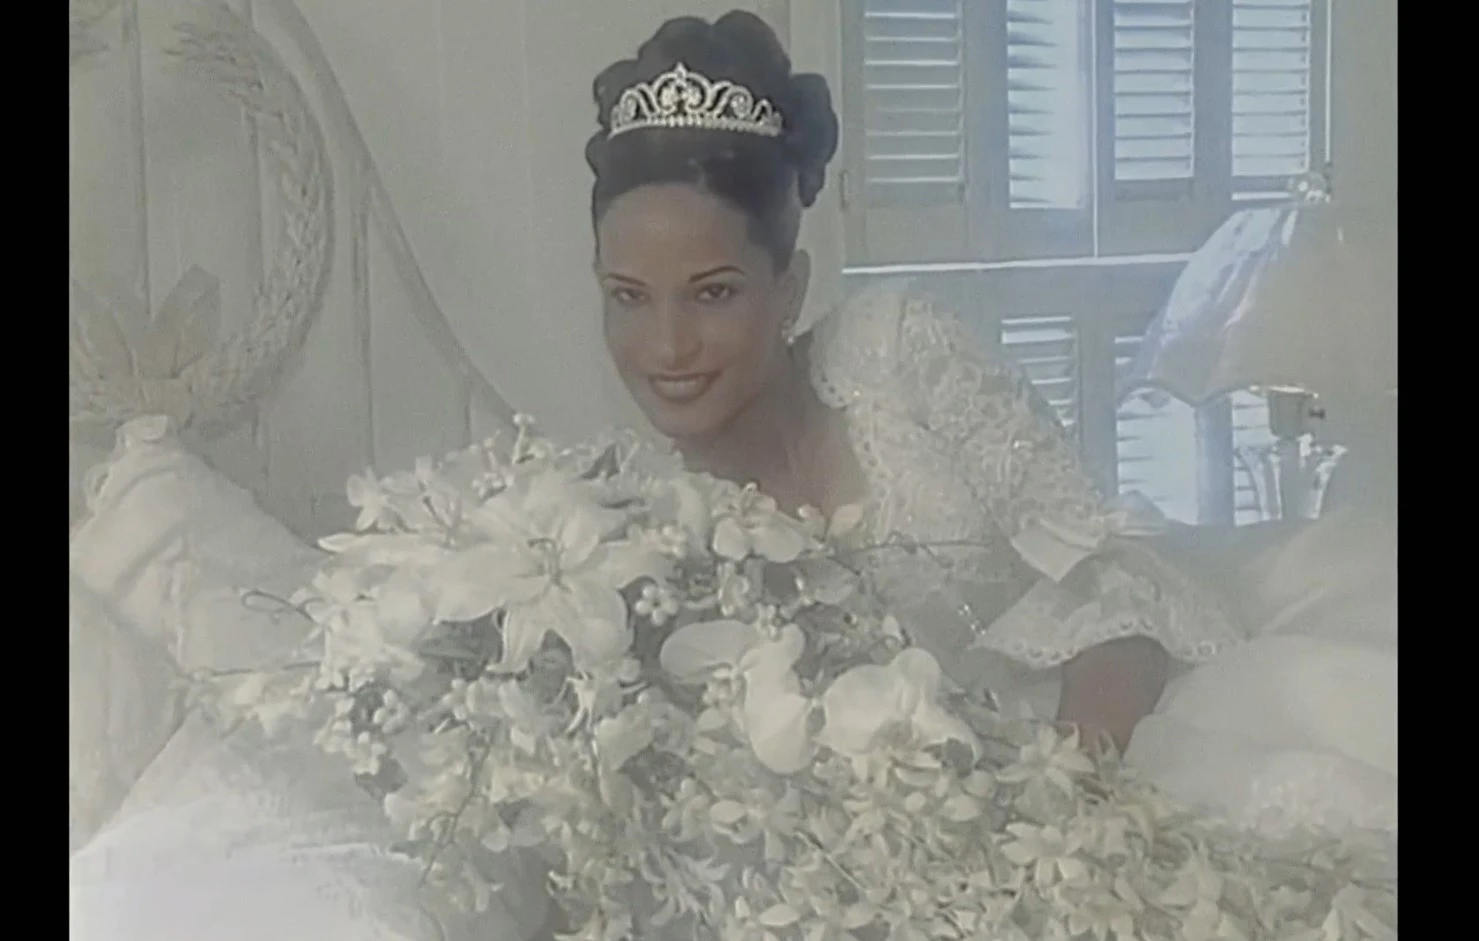 New Link Gladys Ricart case video viral on Reddit and Twitter, the bloody bride